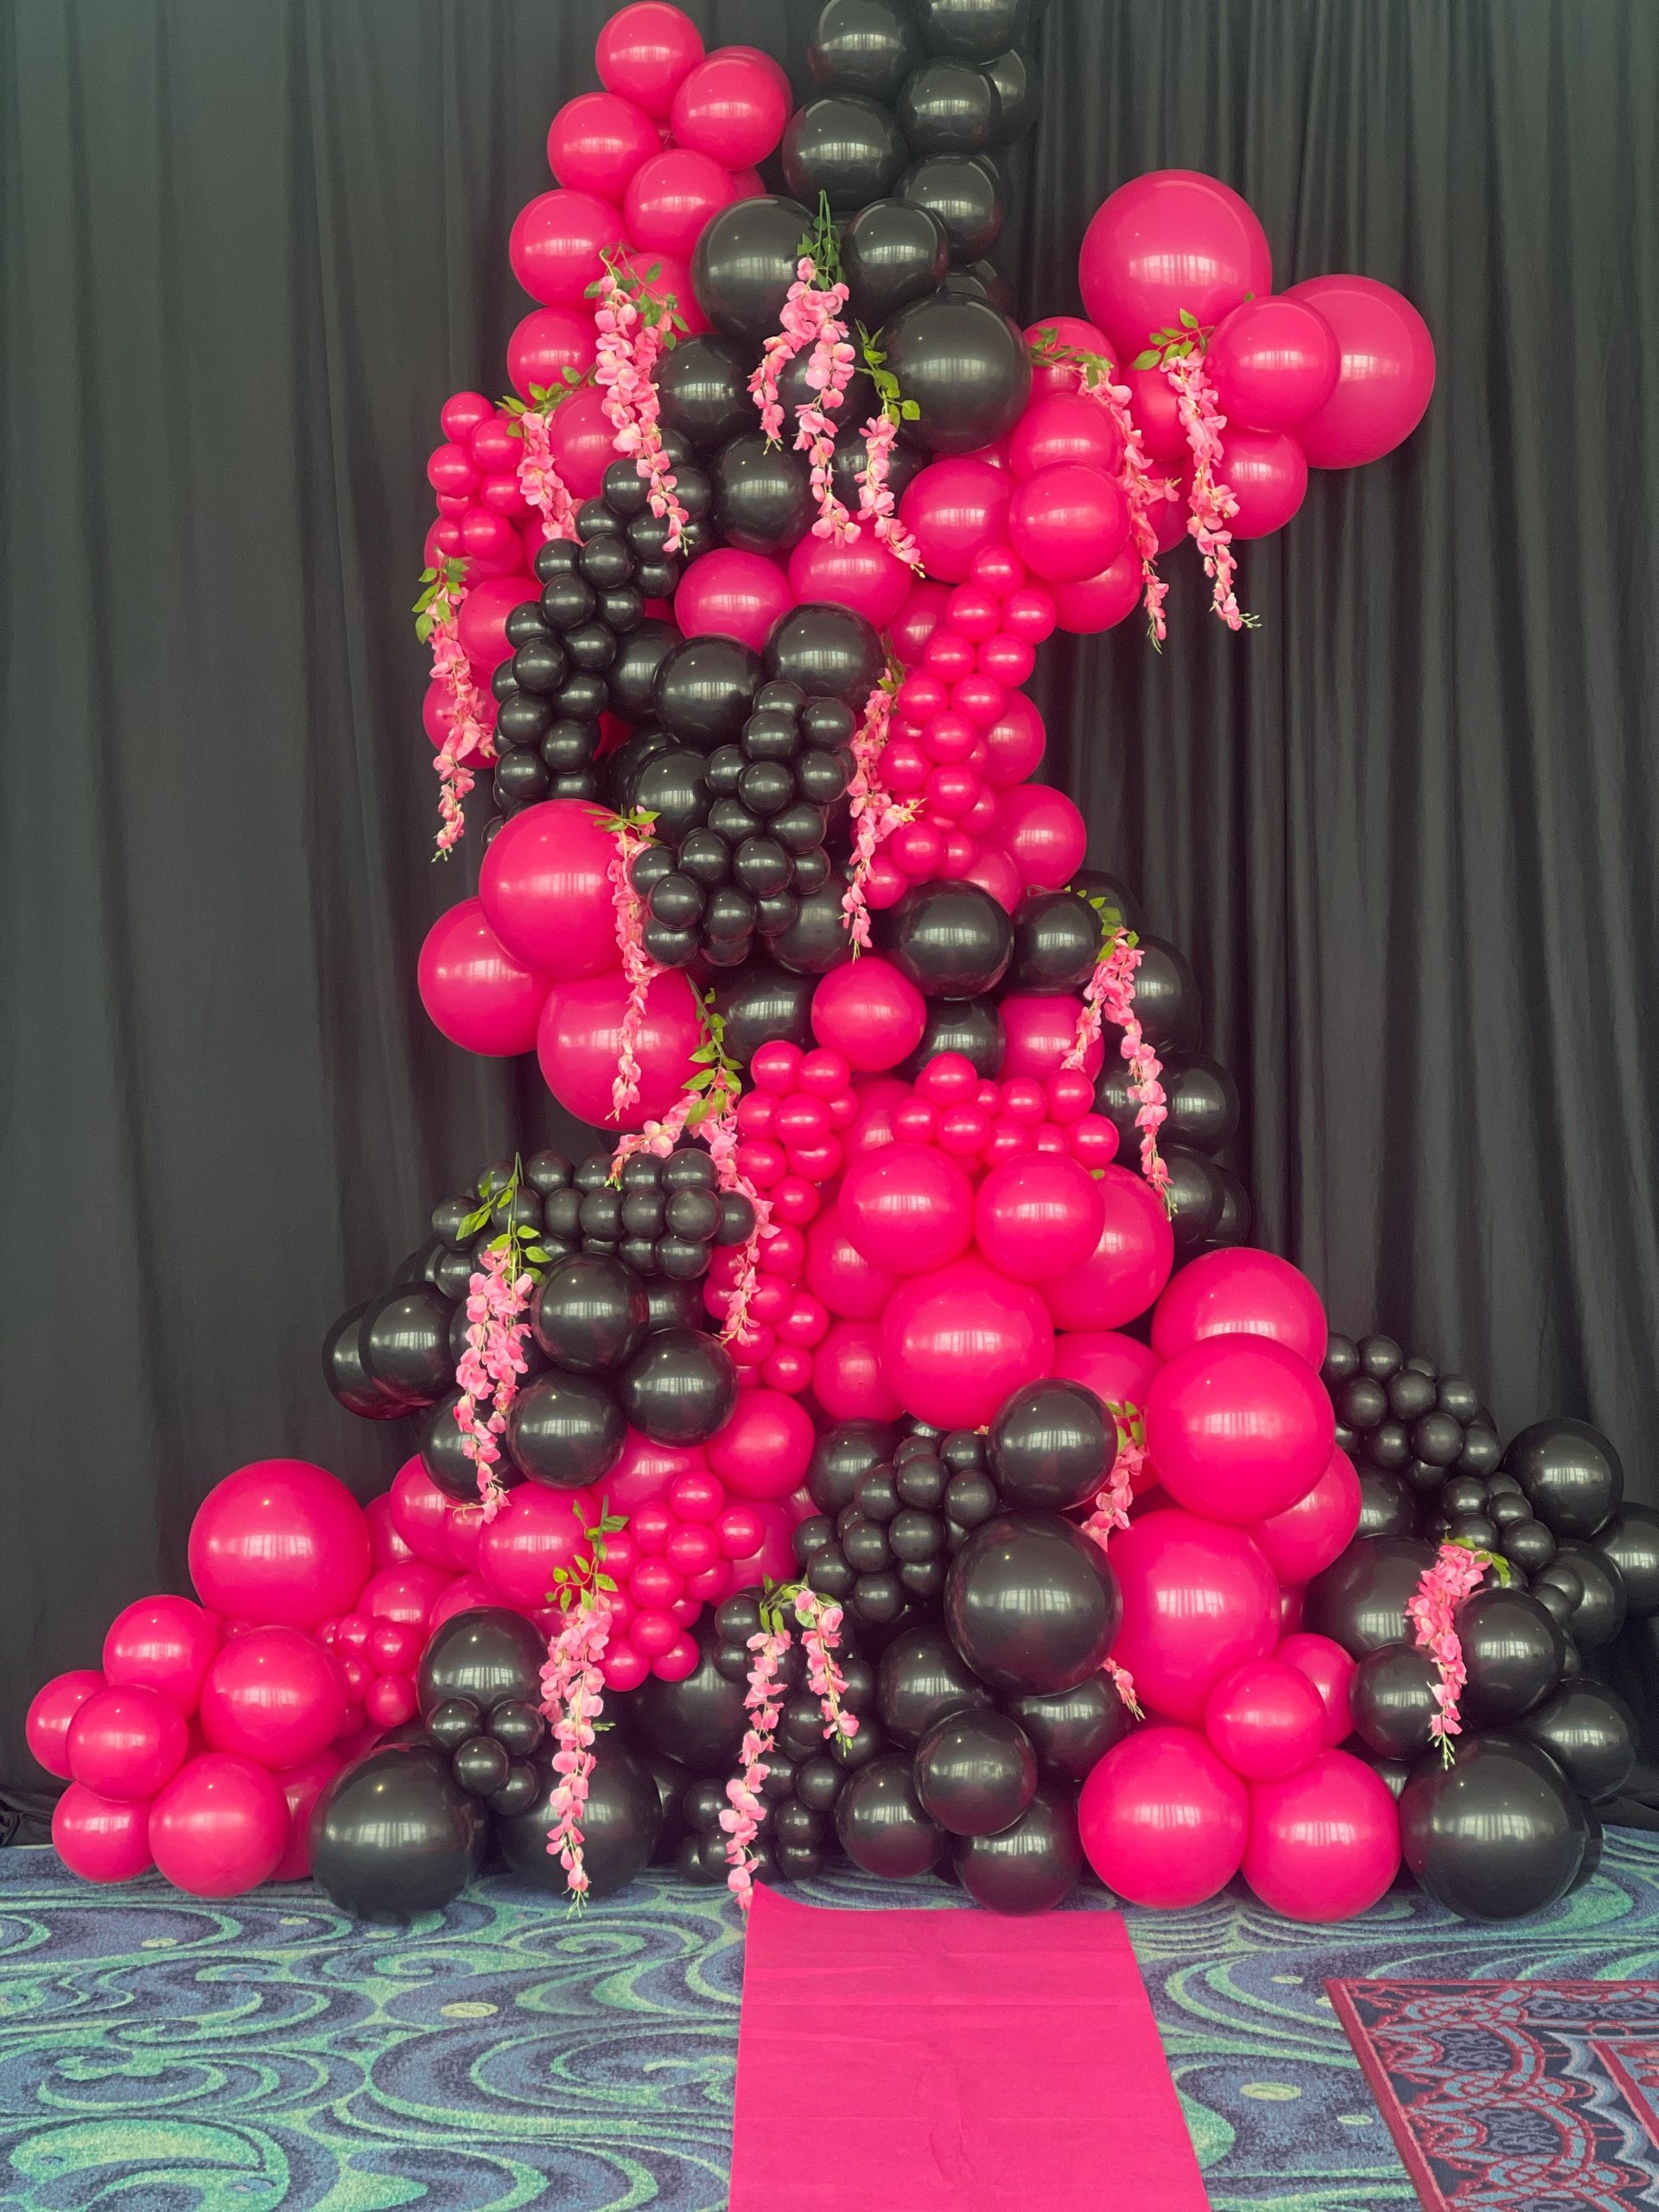 Balloons expertly arranged ceiling to floor balloon garland, a dramatic and memorable photo op area.